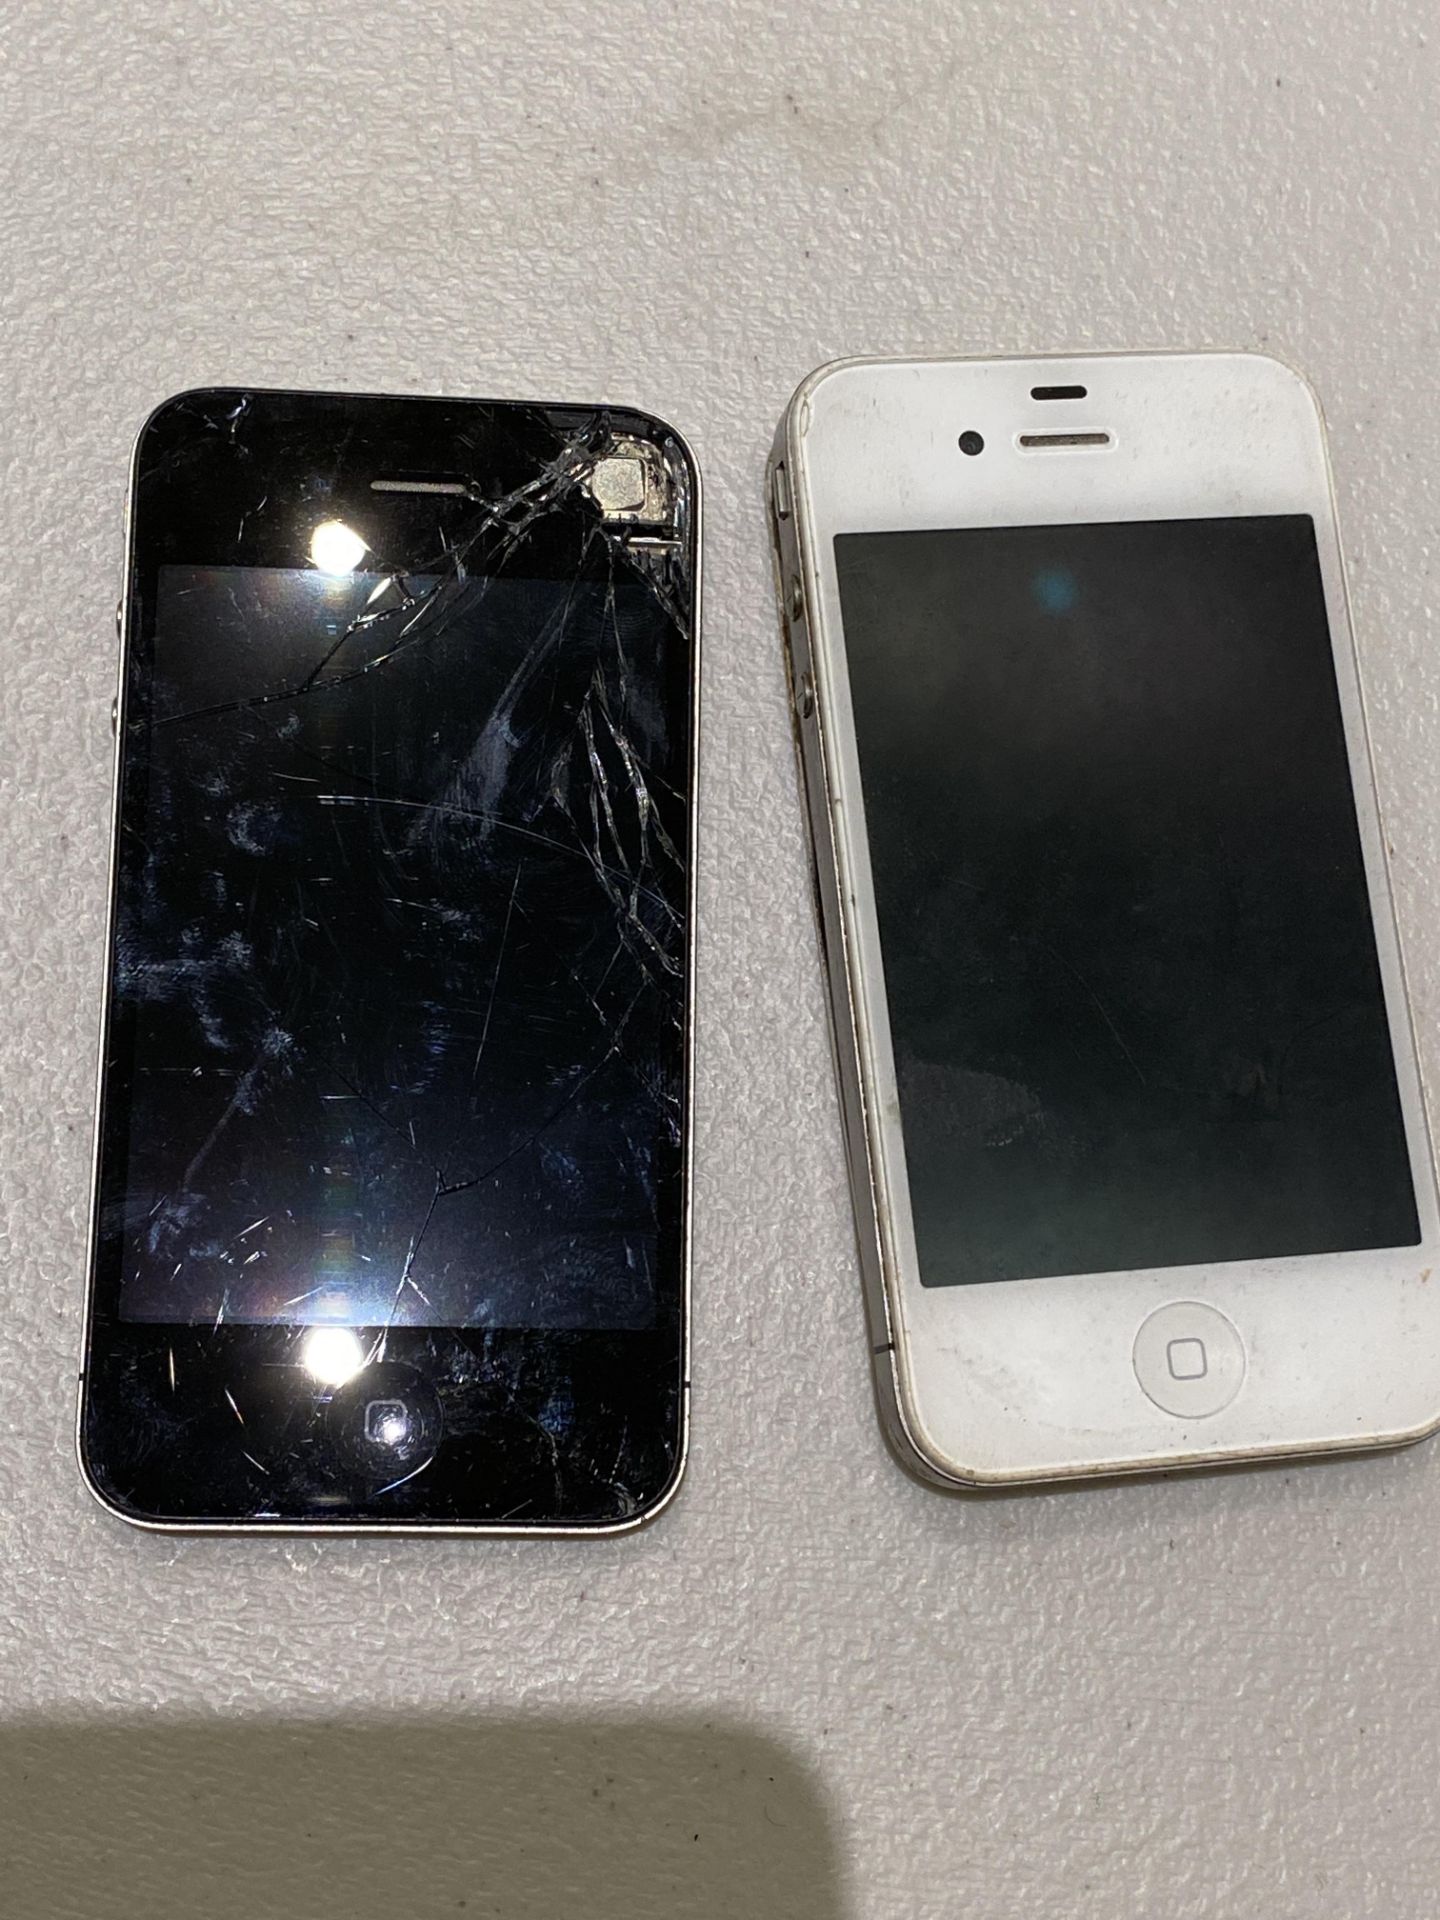 2 Apple Iphones - Both Damaged Cracked Screens and Cracked Rear Covers